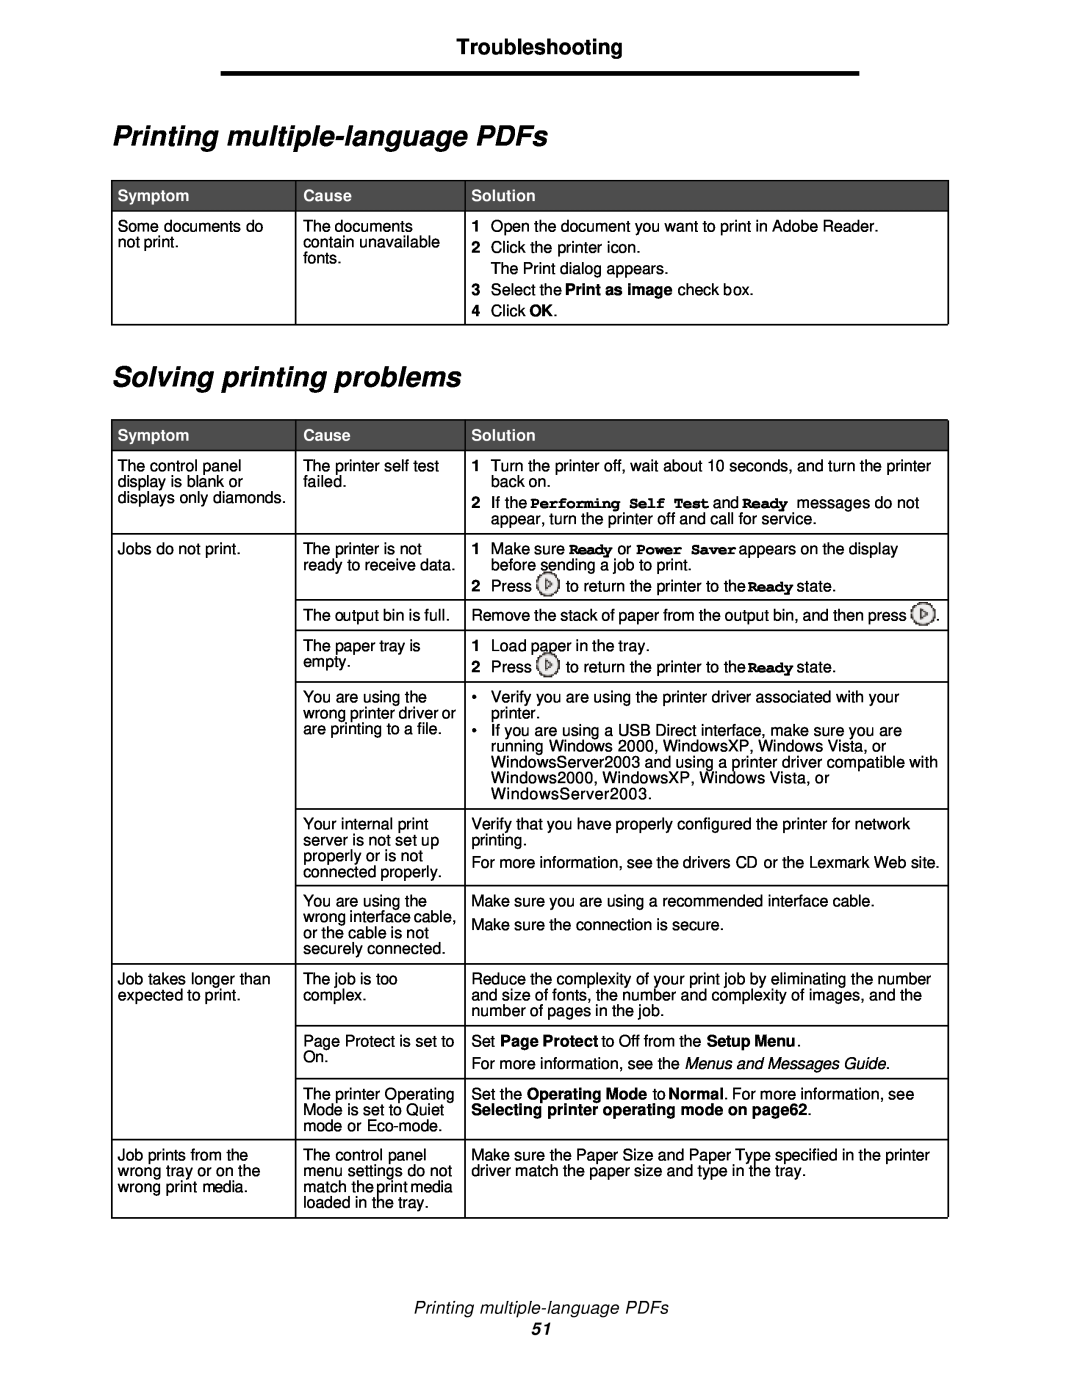 Lexmark 350d manual Printing multiple-language PDFs, Solving printing problems, Troubleshooting, Symptom, Cause, Solution 